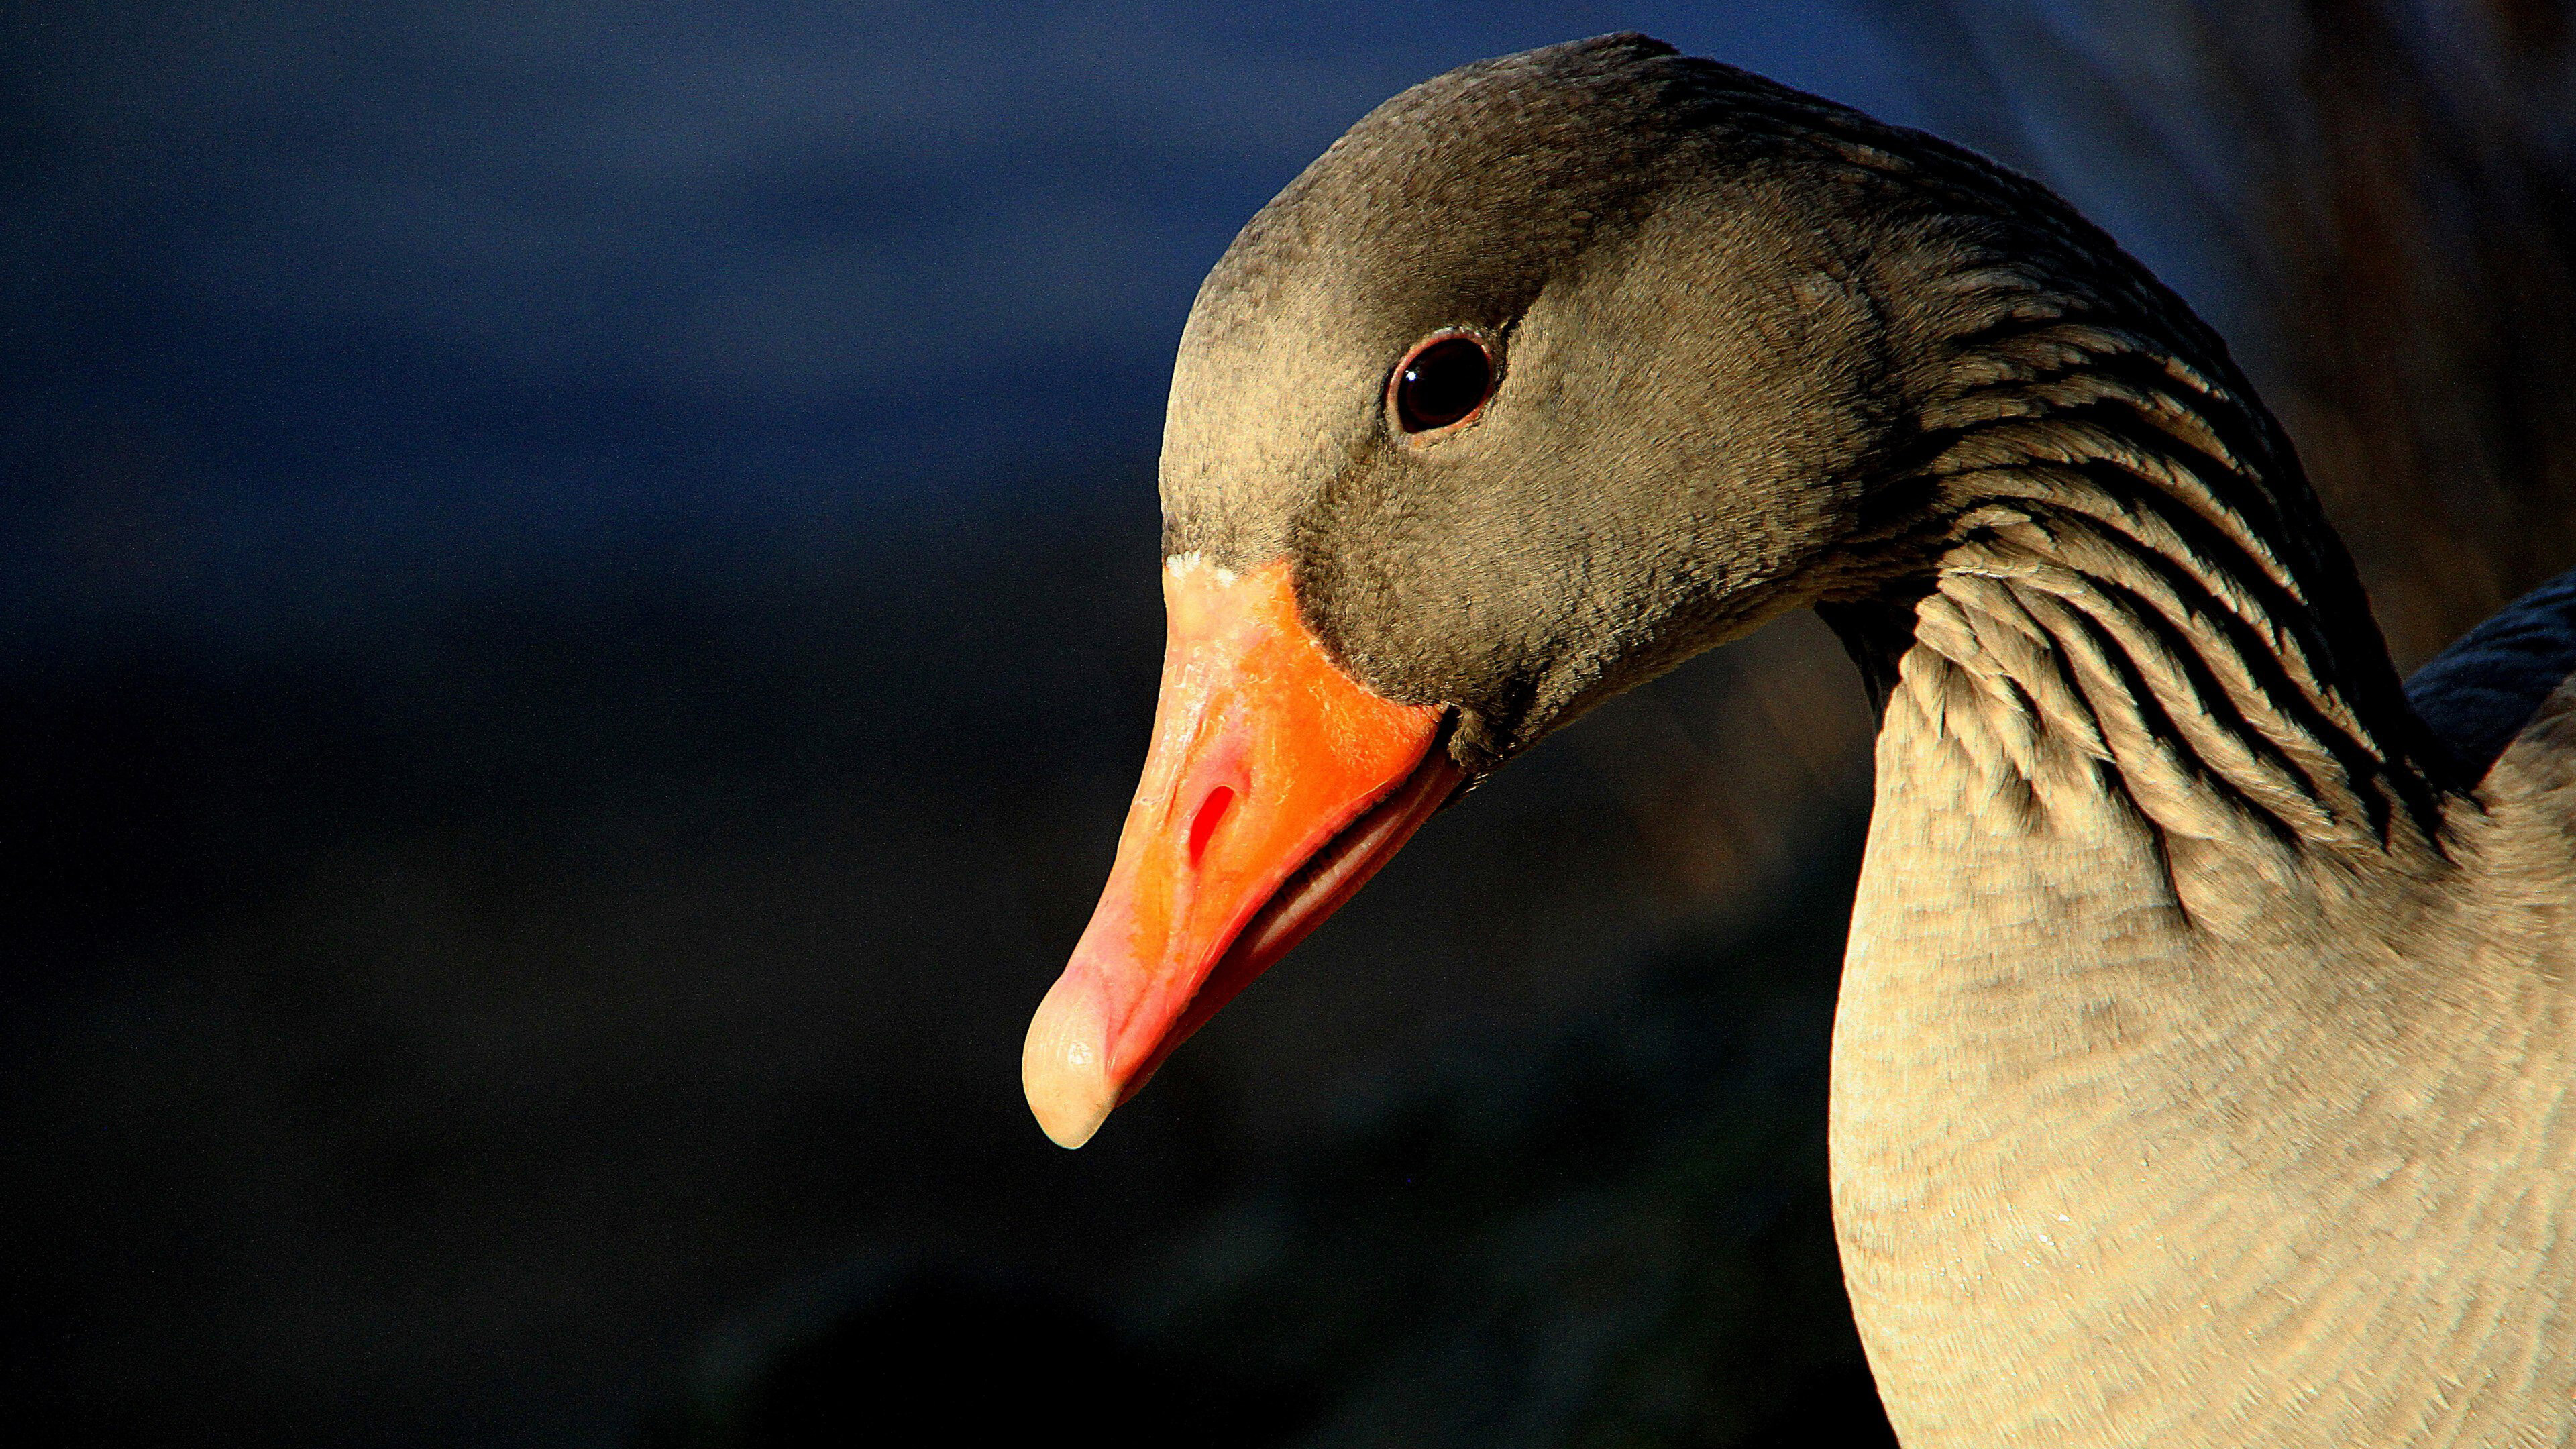 Geese: Greylag, A large waterbird with a long neck short legs webbed fee and a short broad bill. 3840x2160 4K Wallpaper.